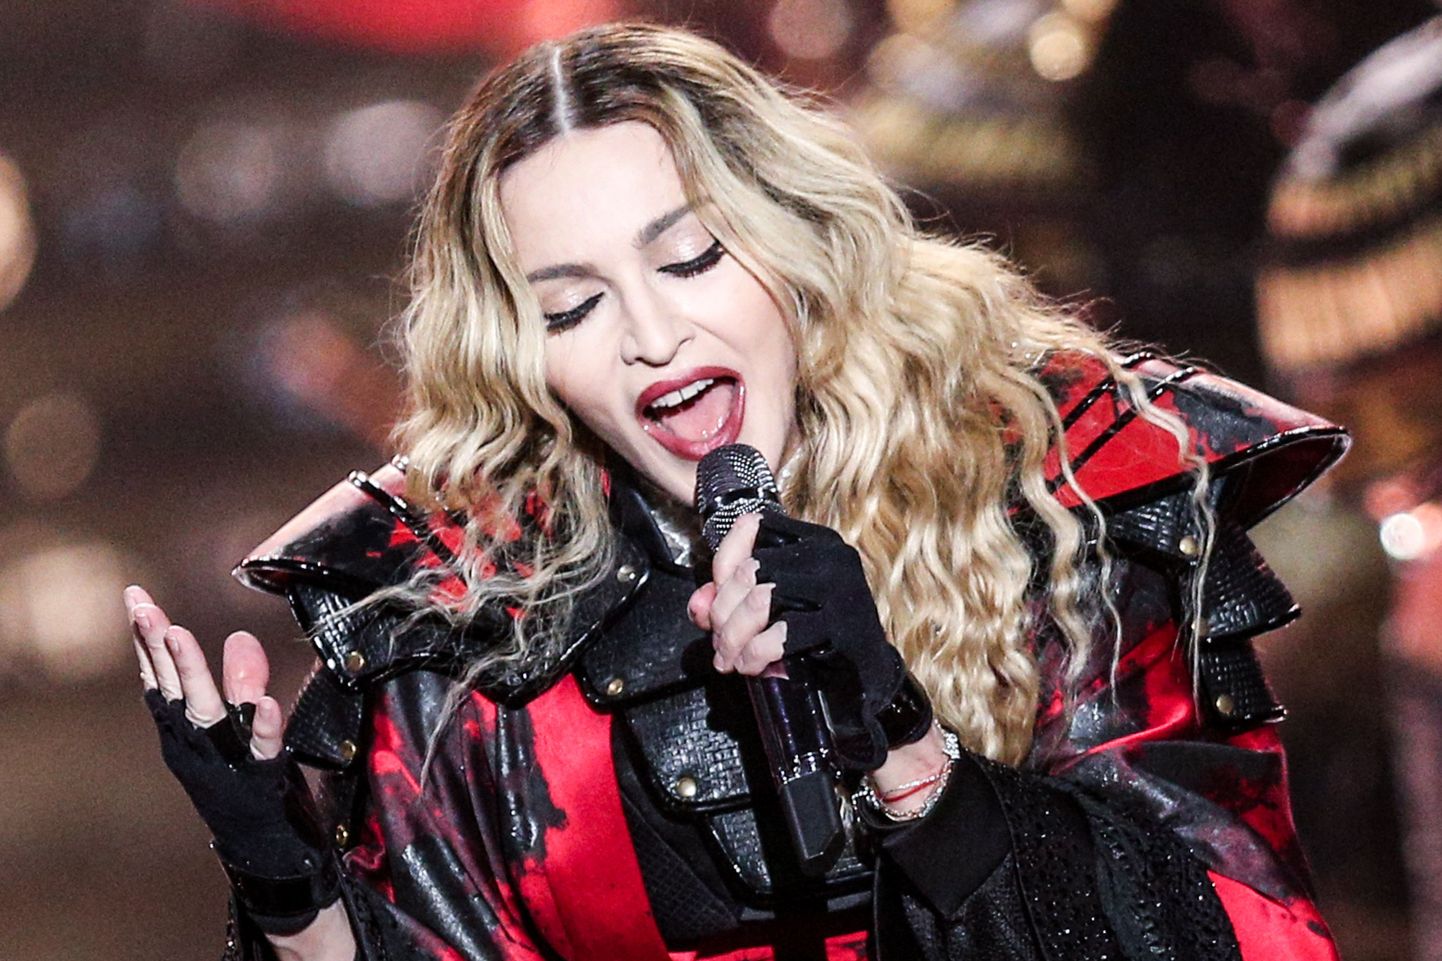 Madonna performs at the opening night of her Rebel Heart Tour at the Bell Center on Wednesday, Sept. 9, 2015, in Montreal, Quebec. (Photo by Rich Fury/Invision/AP)